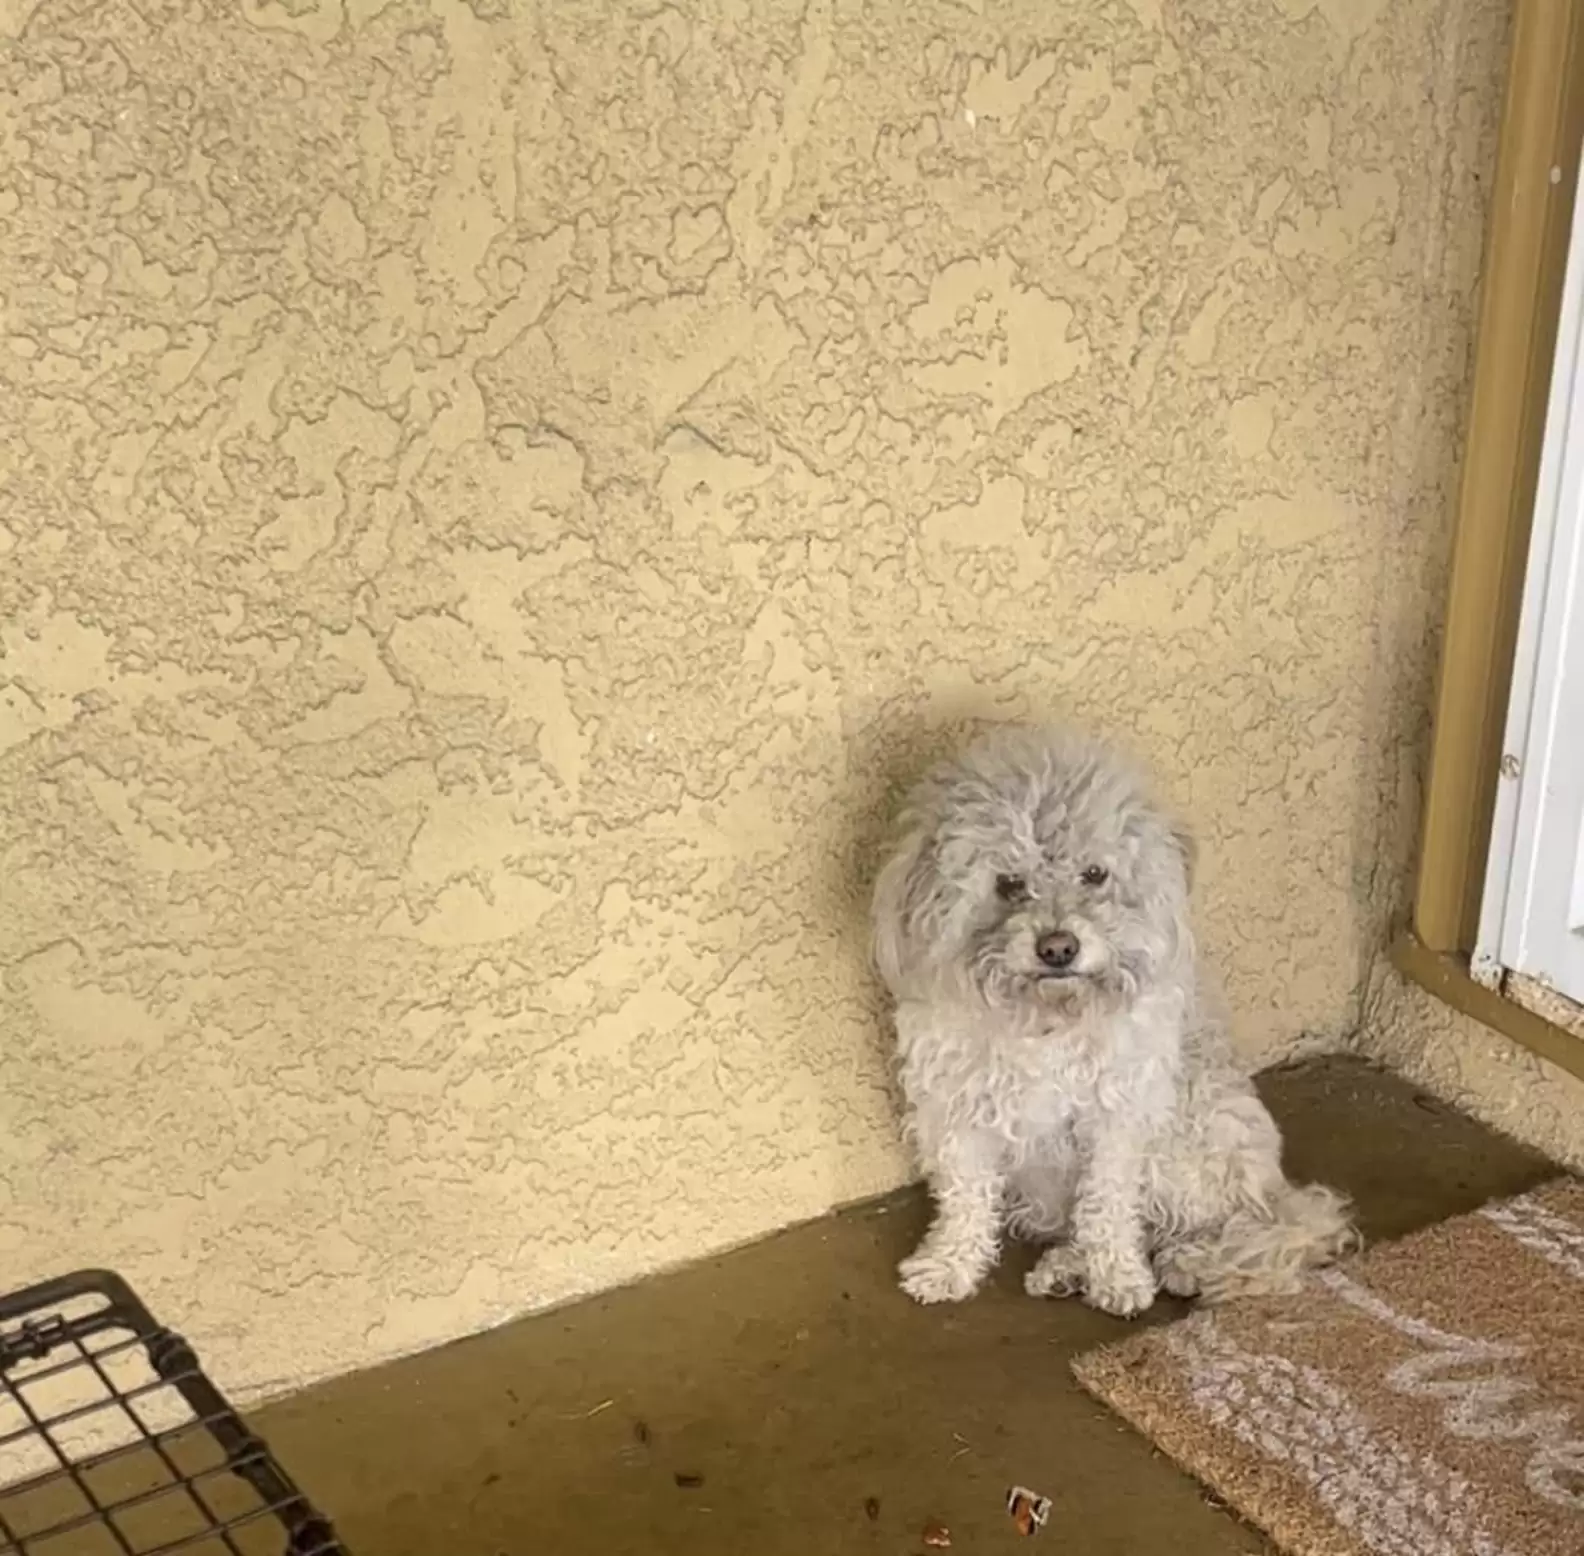 https://www.thedodo.com/daily-dodo/homeless-dog-knocks-on-every-door-in-neighborhood-looking-for-a-forever-family